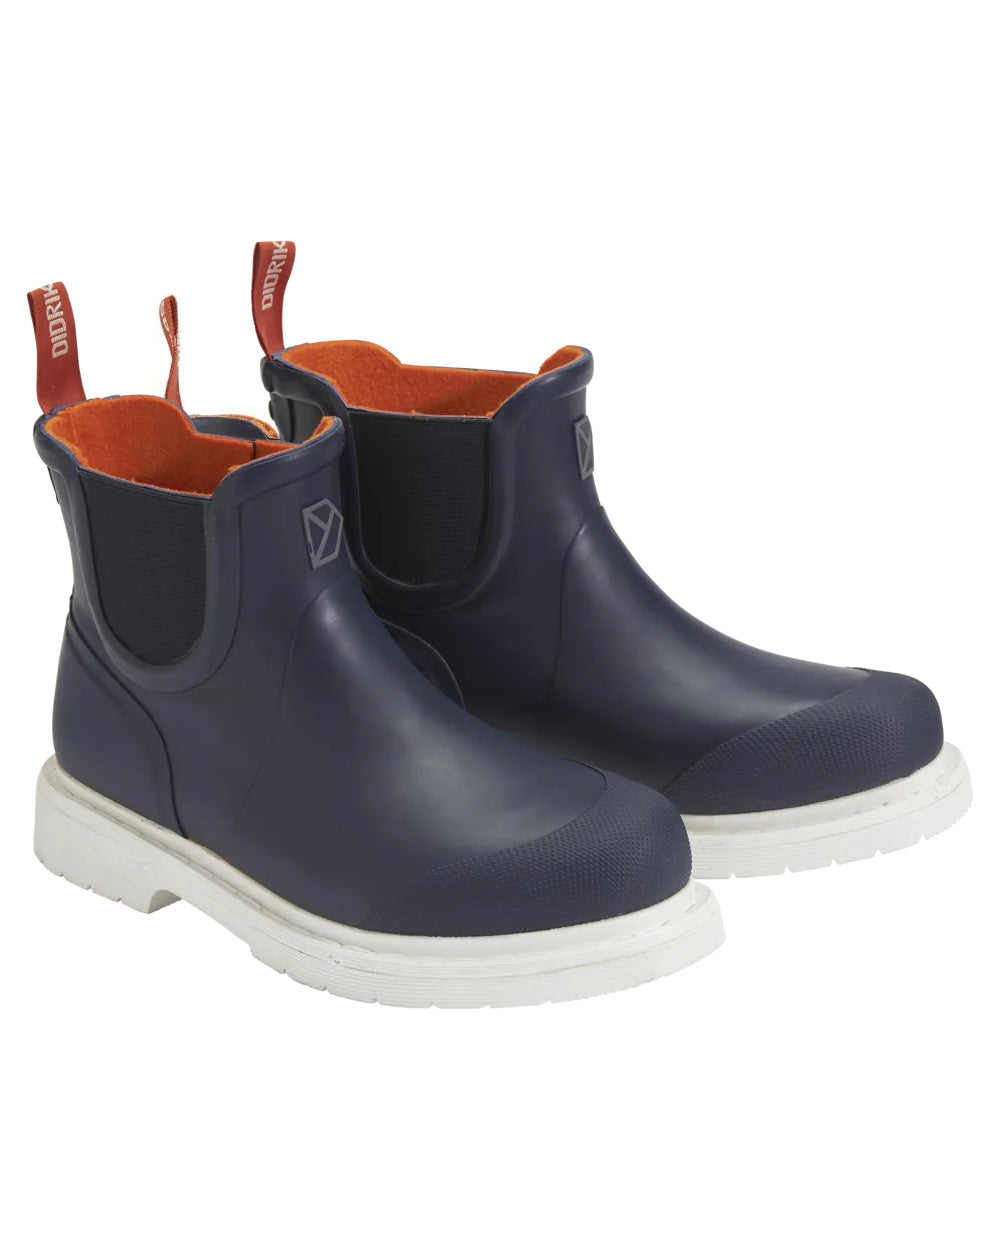 Dark Night Blue Coloured Didriksons Vinga Womens Rubber Boots On A White Background 